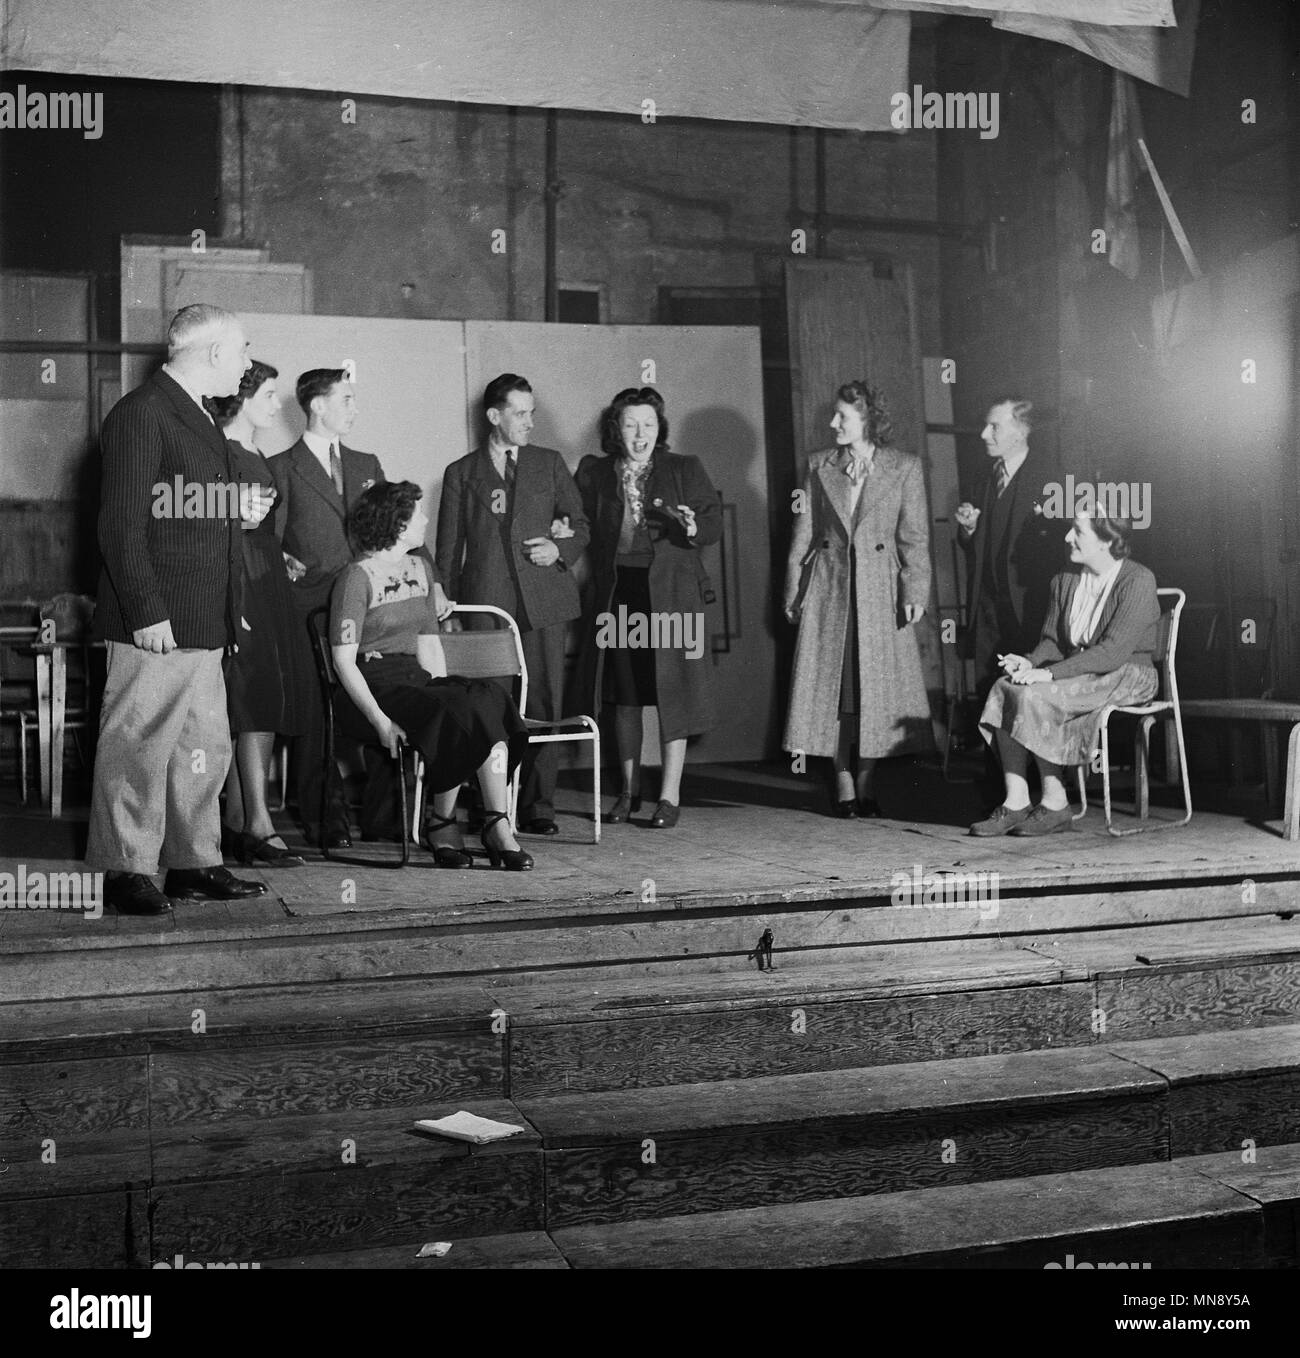 1950s, historical, amateur dramatics, ladies and gentlemen acting on together an old wooden stage during rehearsals of a play, England, UK. In this era, amateur theatre was popular and rehearsals would take place in all manner of venues including church halls and local sports clubs. Stock Photo